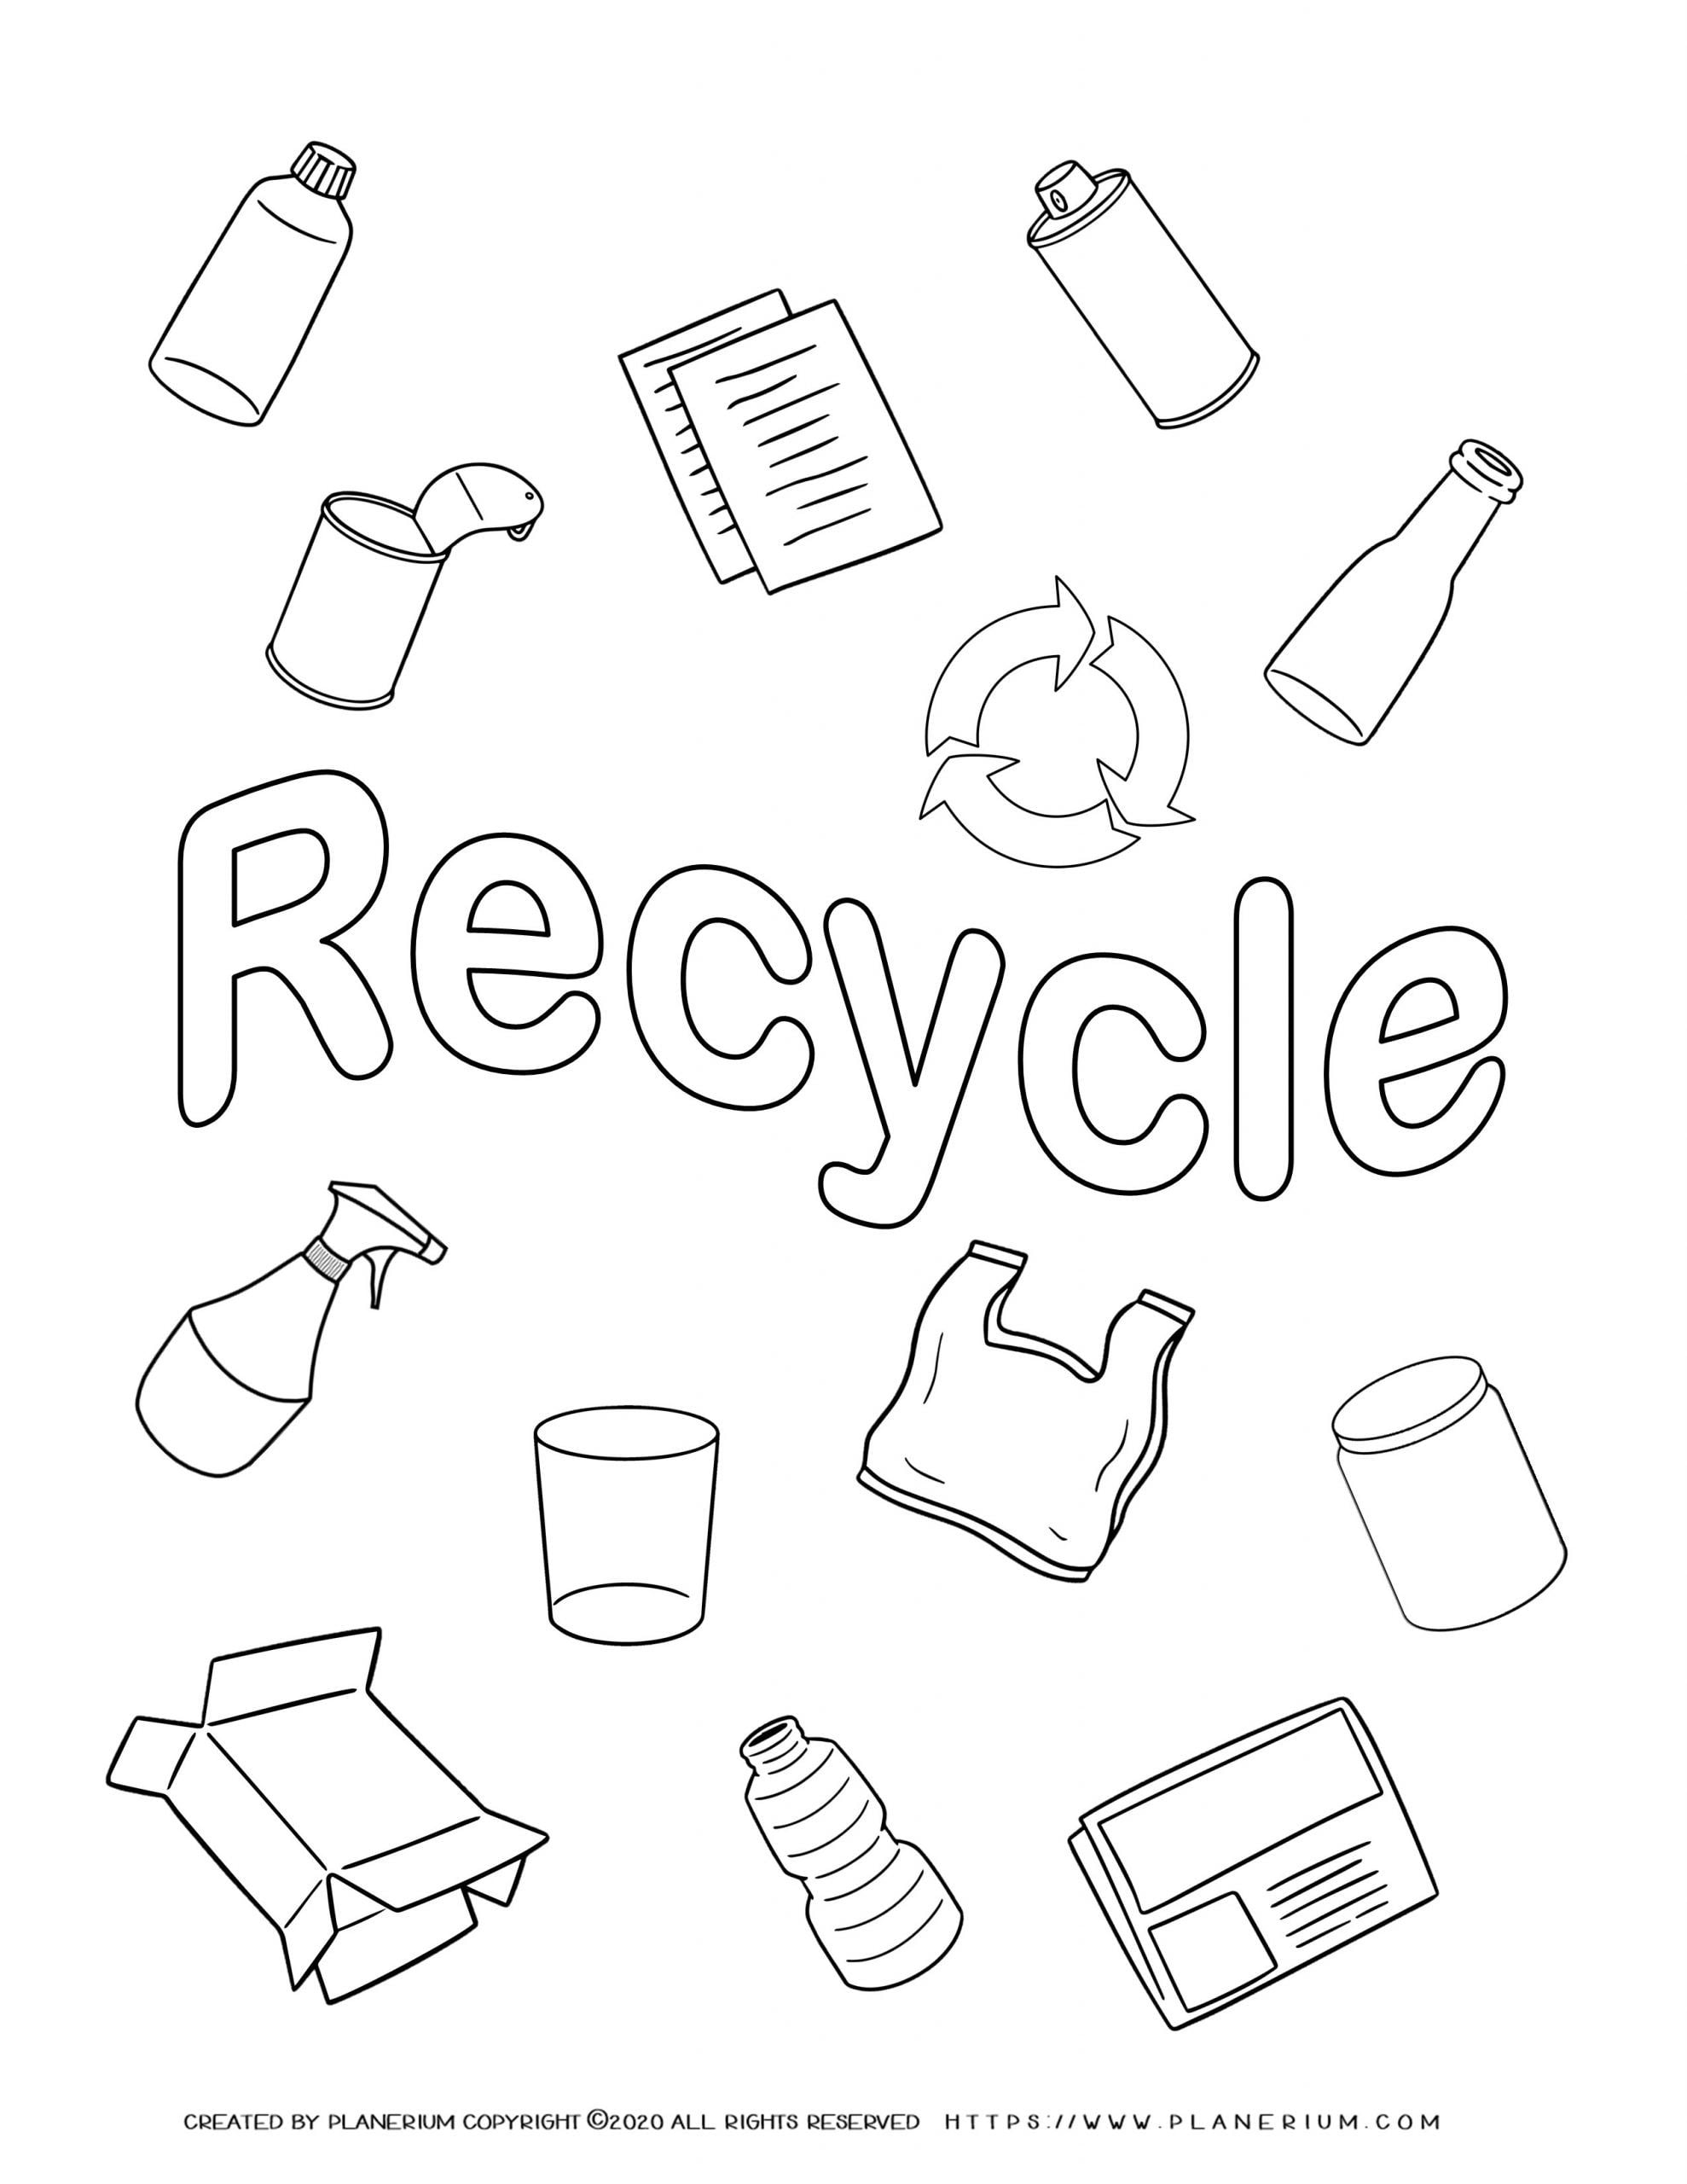 Earth day - Coloring page - Recycled items